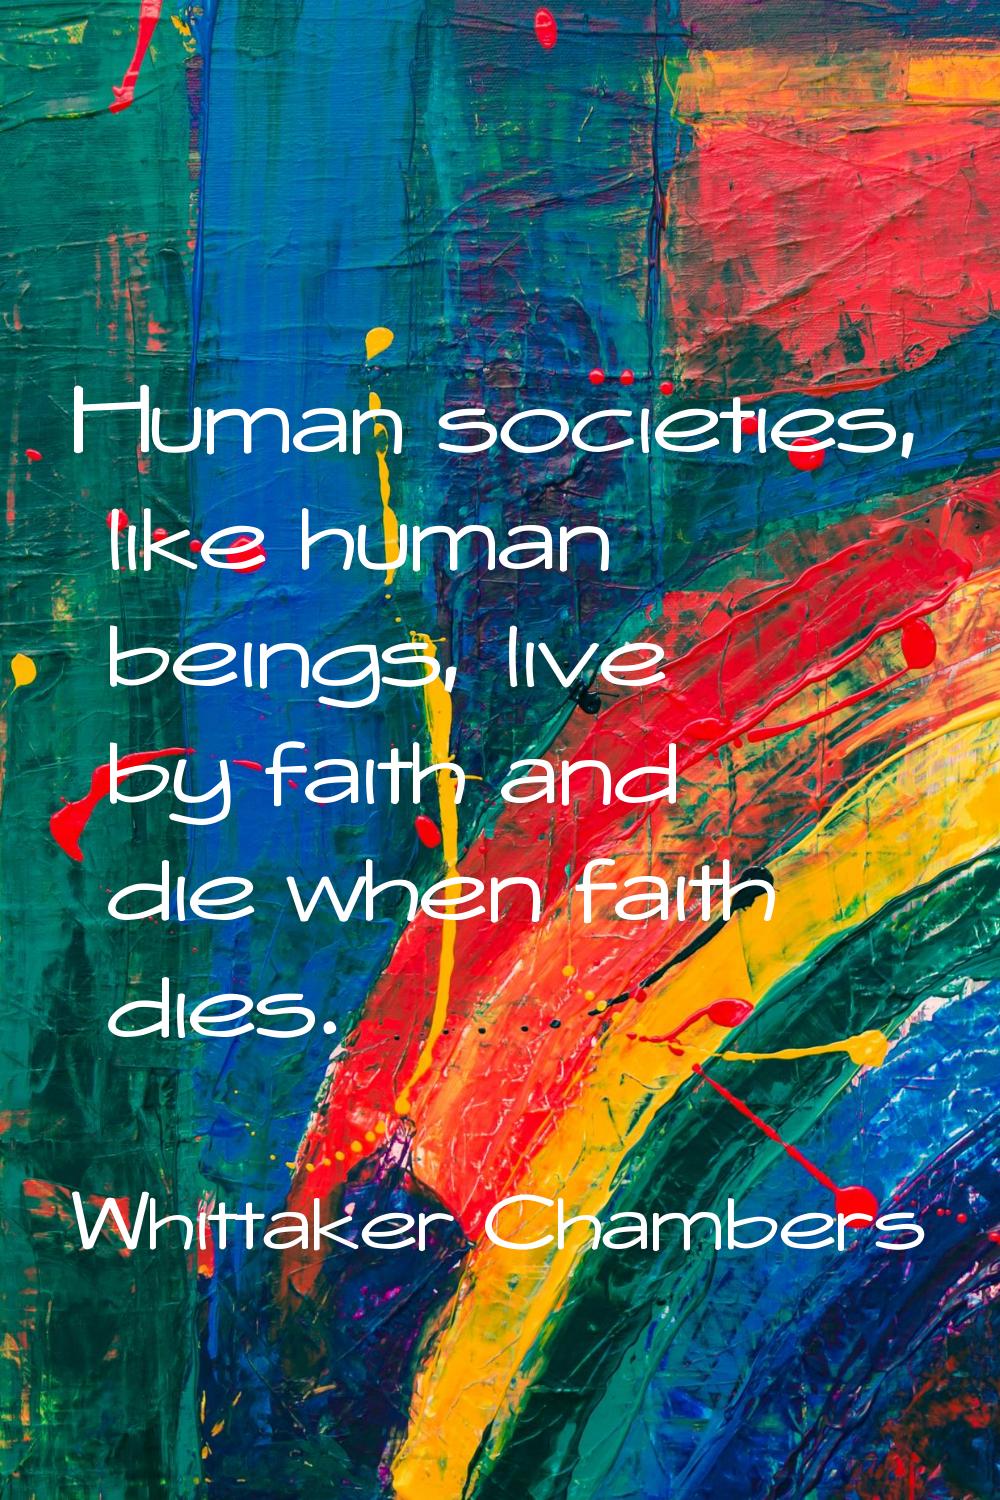 Human societies, like human beings, live by faith and die when faith dies.